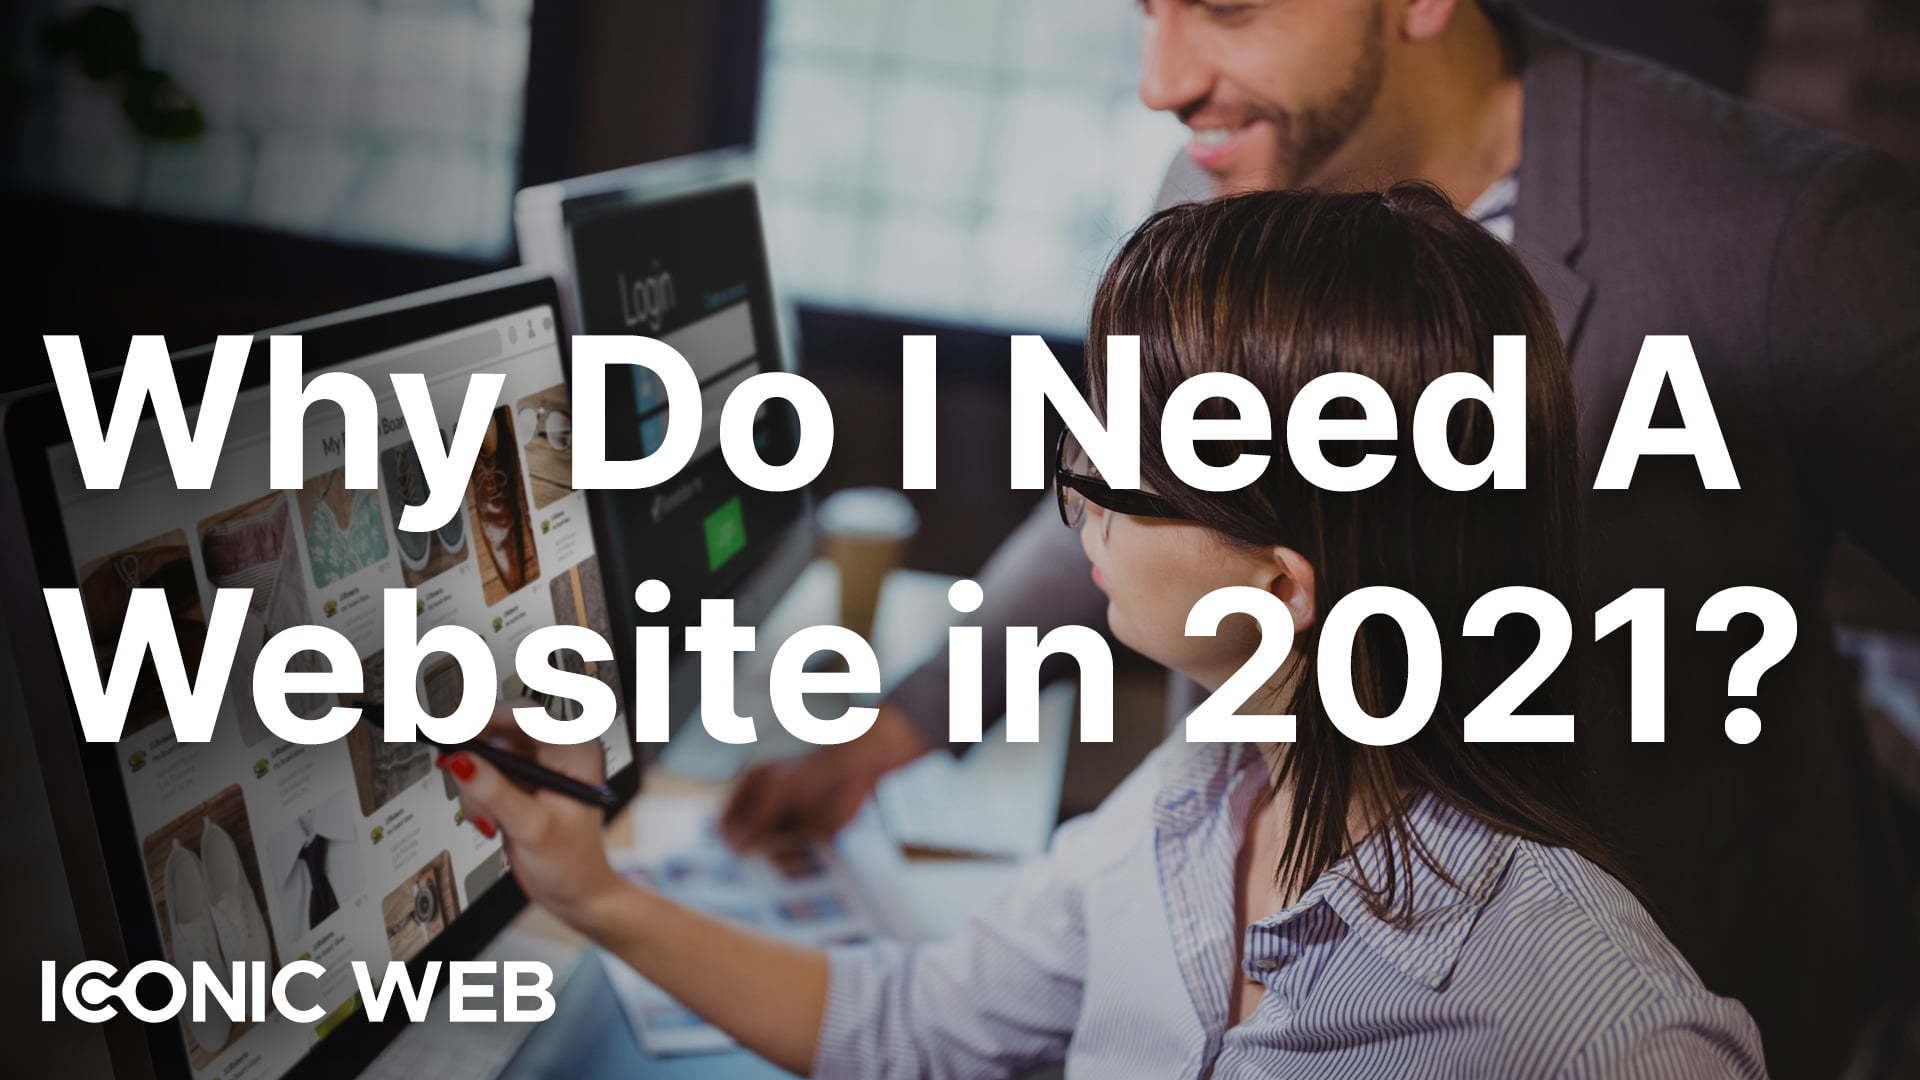 Help I Need a Website! Why Do I Need a Small Business Website in 2021?